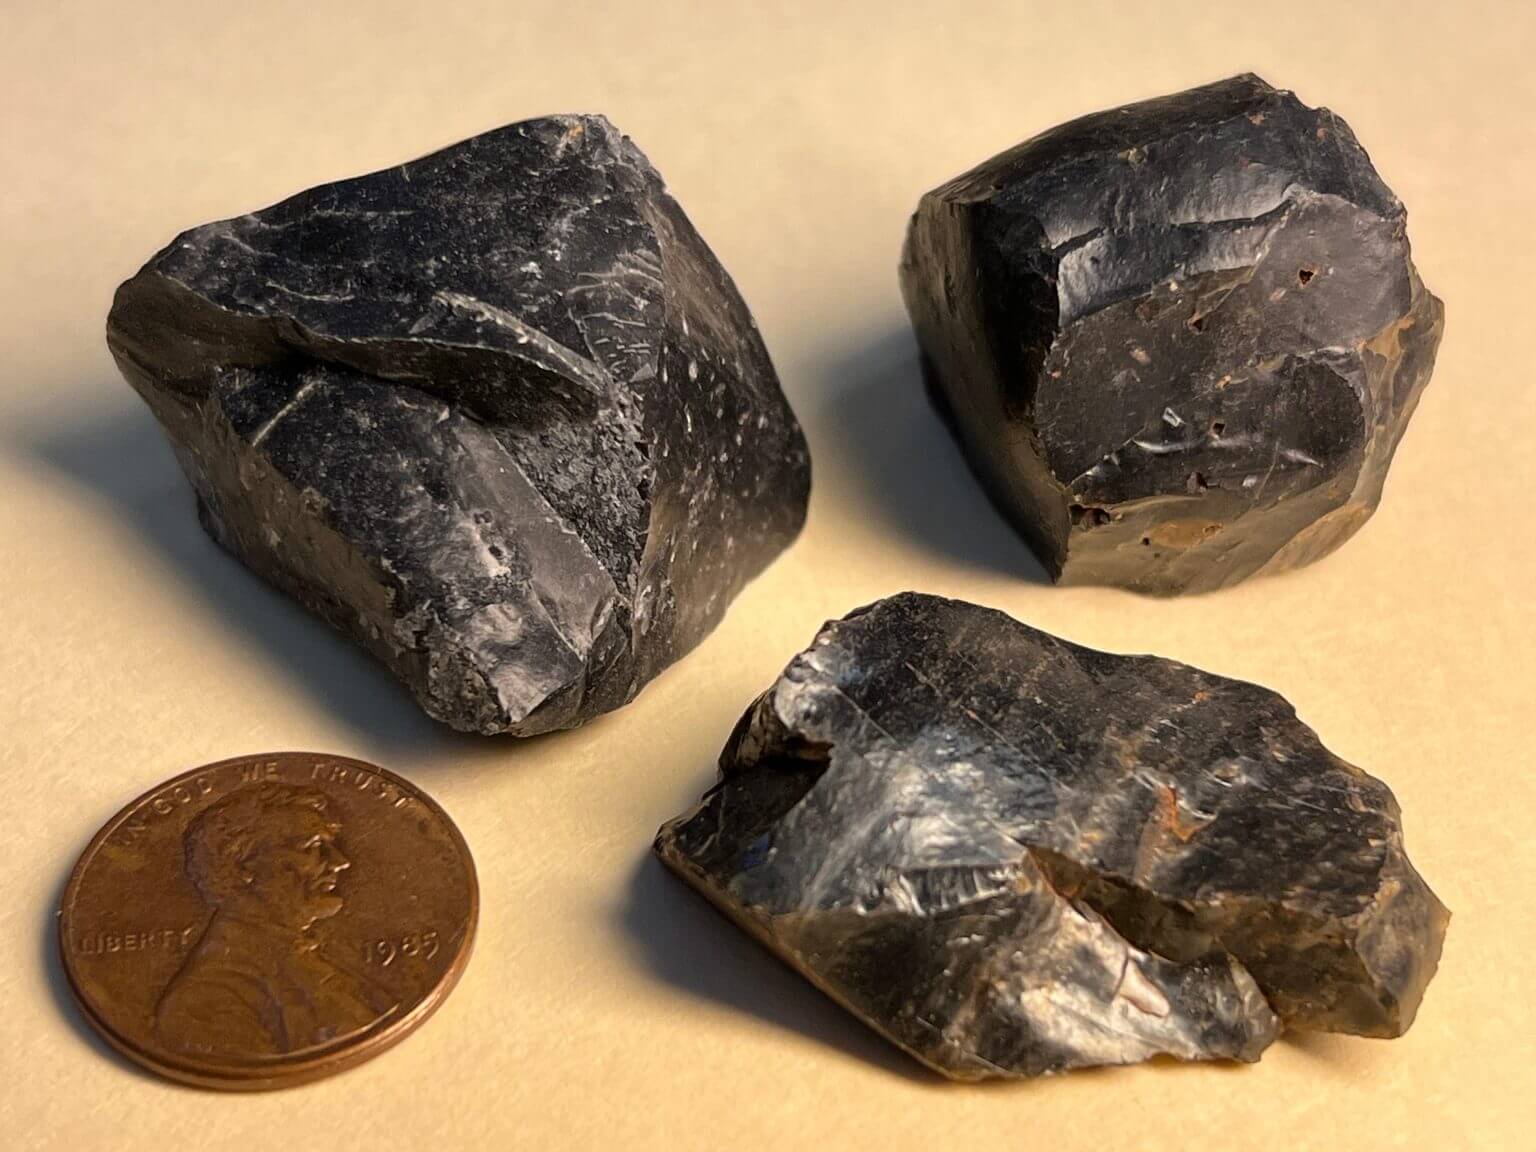 3.5 billion year old Apex chert from the wilds of Western Australia. Credit: Carnegie Science Earth and Planets Laboratory